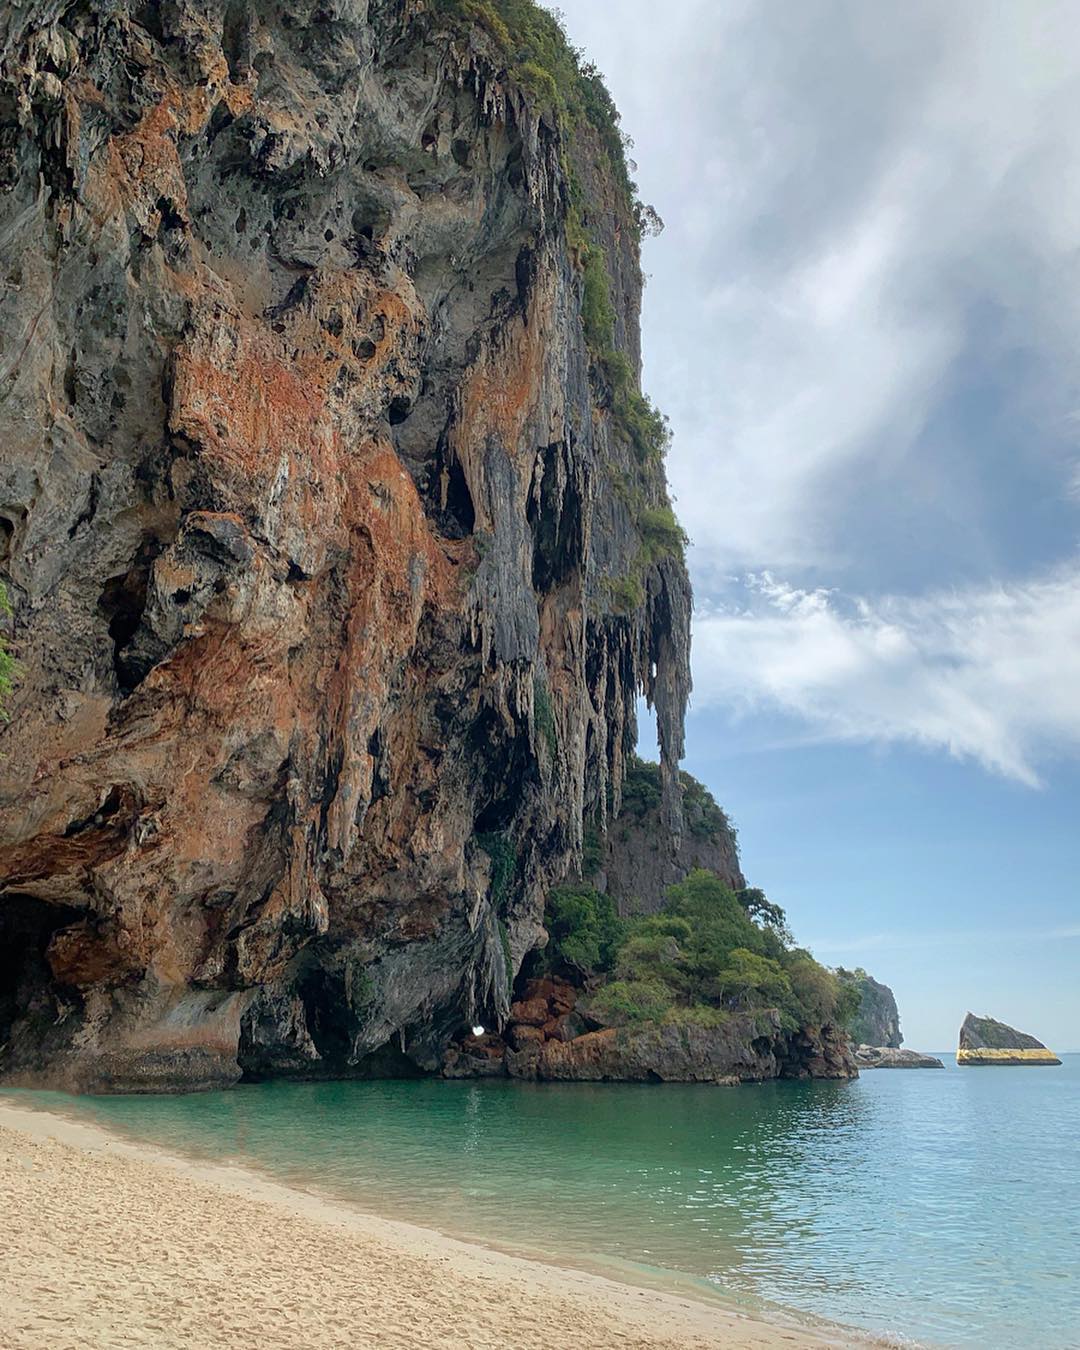 Phra Nang Beach is surrounded by stunning limestone cliffs and is located on the southern most tip of the Railay Peninsula. It's the southern strip of sand in Railay Bay. With 450 metres in length, and reachable in a mere 20-minute long-tail boat trip directly from Ao Nang.
.
#phranangbeach #railaybeach #railaybay #aonang #thailand #travel #beach #sun #sea #beautifulplace #limestonecliff #krabi